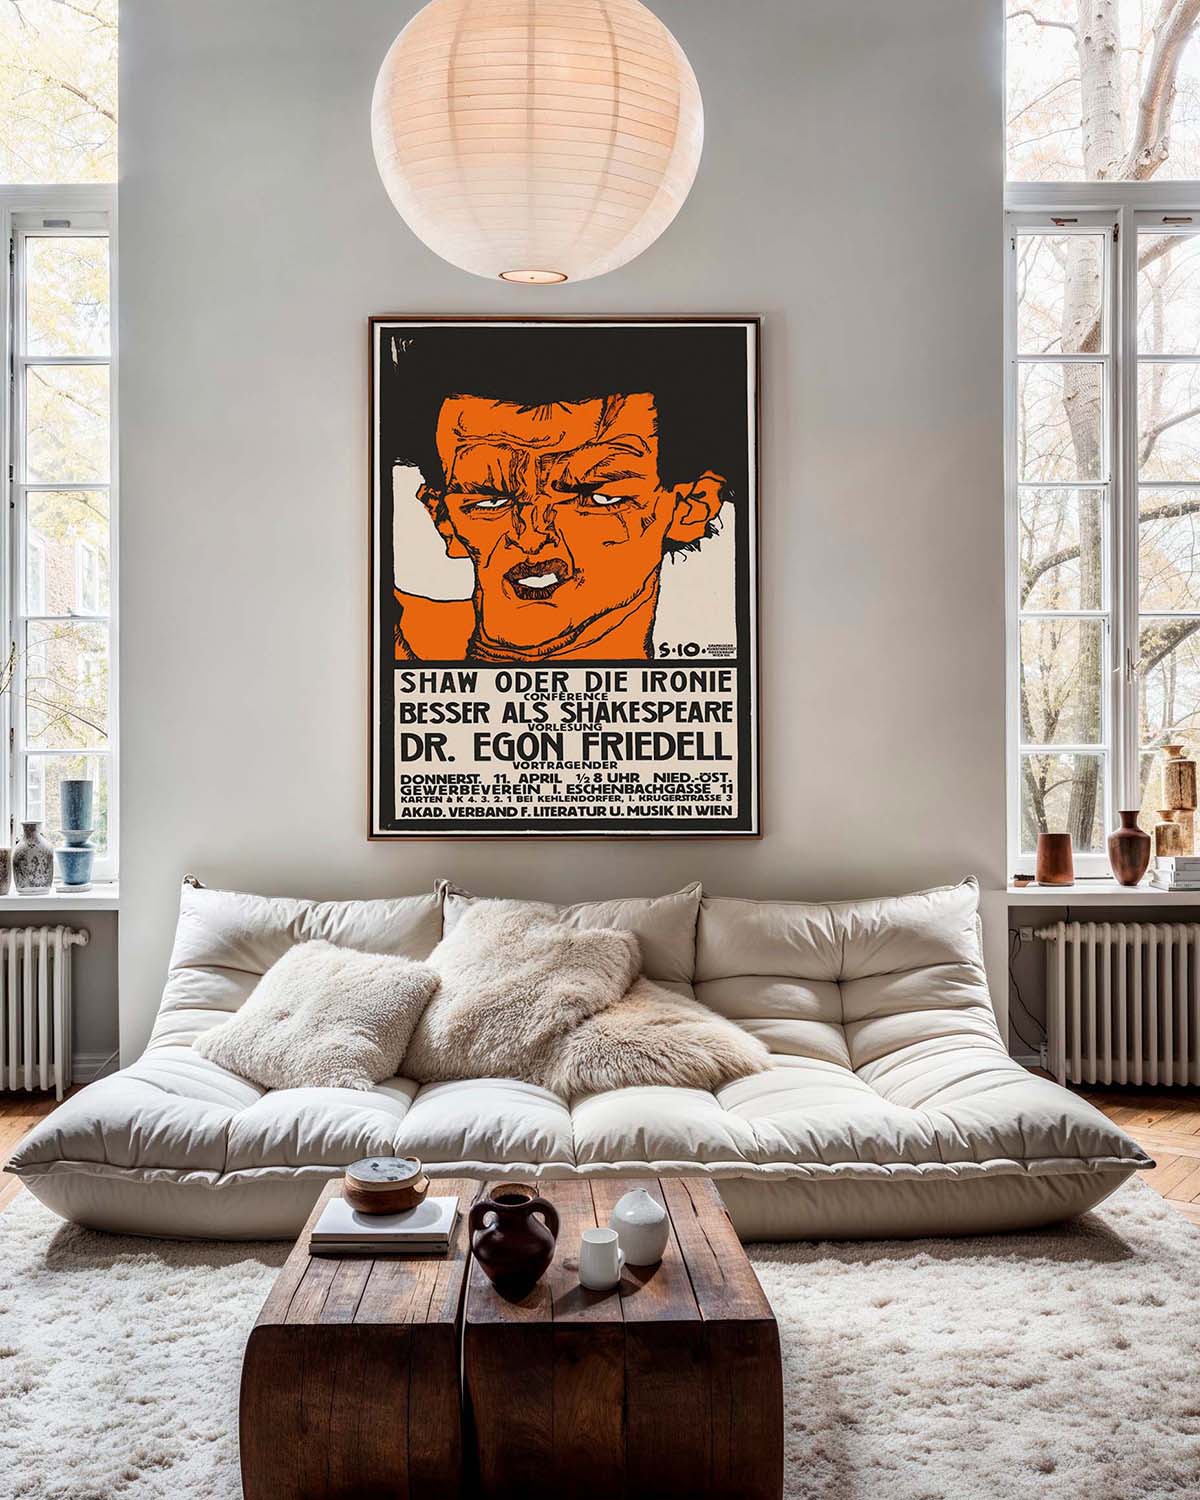 Vintage Egon Schiele poster entitled 'Shaw oder Die Ironie' featuring an intense male figure in orange and black, with bold text announcing a lecture comparing Shaw to Shakespeare